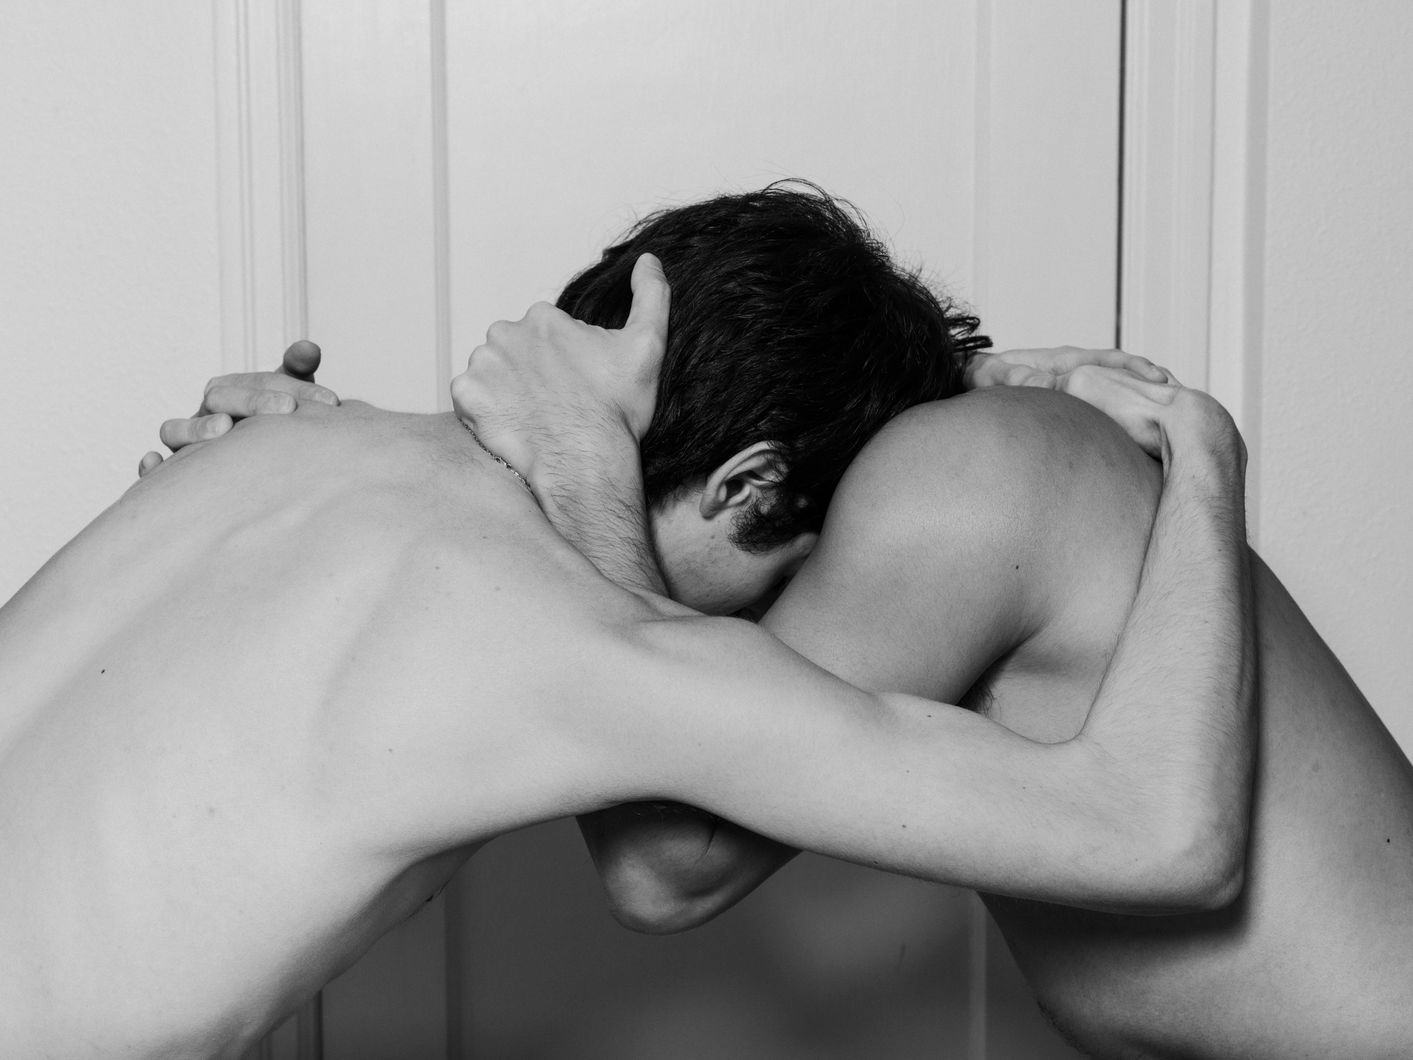 Black and white image of two undressed people wrestling. Only their bare backs, arms and hands are visible, as well as the head of one of them. © Ricardo Nagaoka